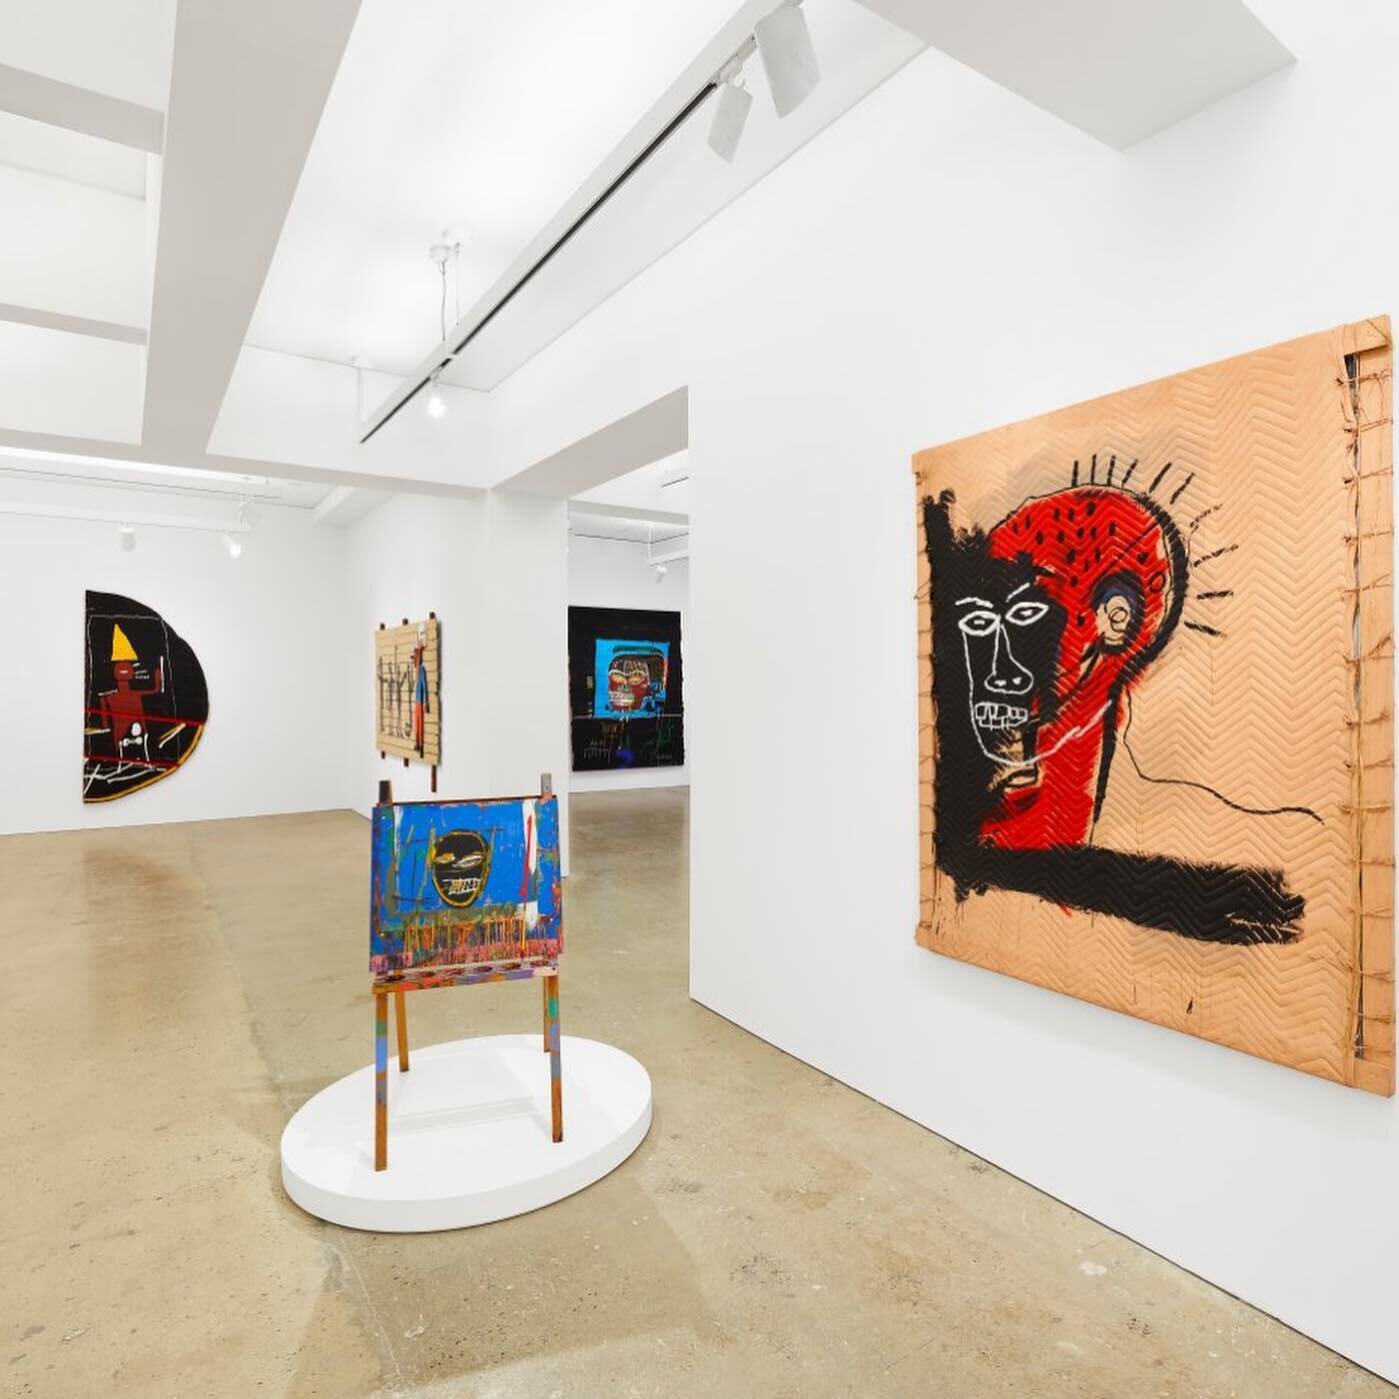 Jean-Michel Basquiat: Art and Objecthood is the first exhibition dedicated to the role of found objects and unconventional materials in the artist&rsquo;s oeuvre. The exhibition will run until June 11th at Nahmad Contemporary.